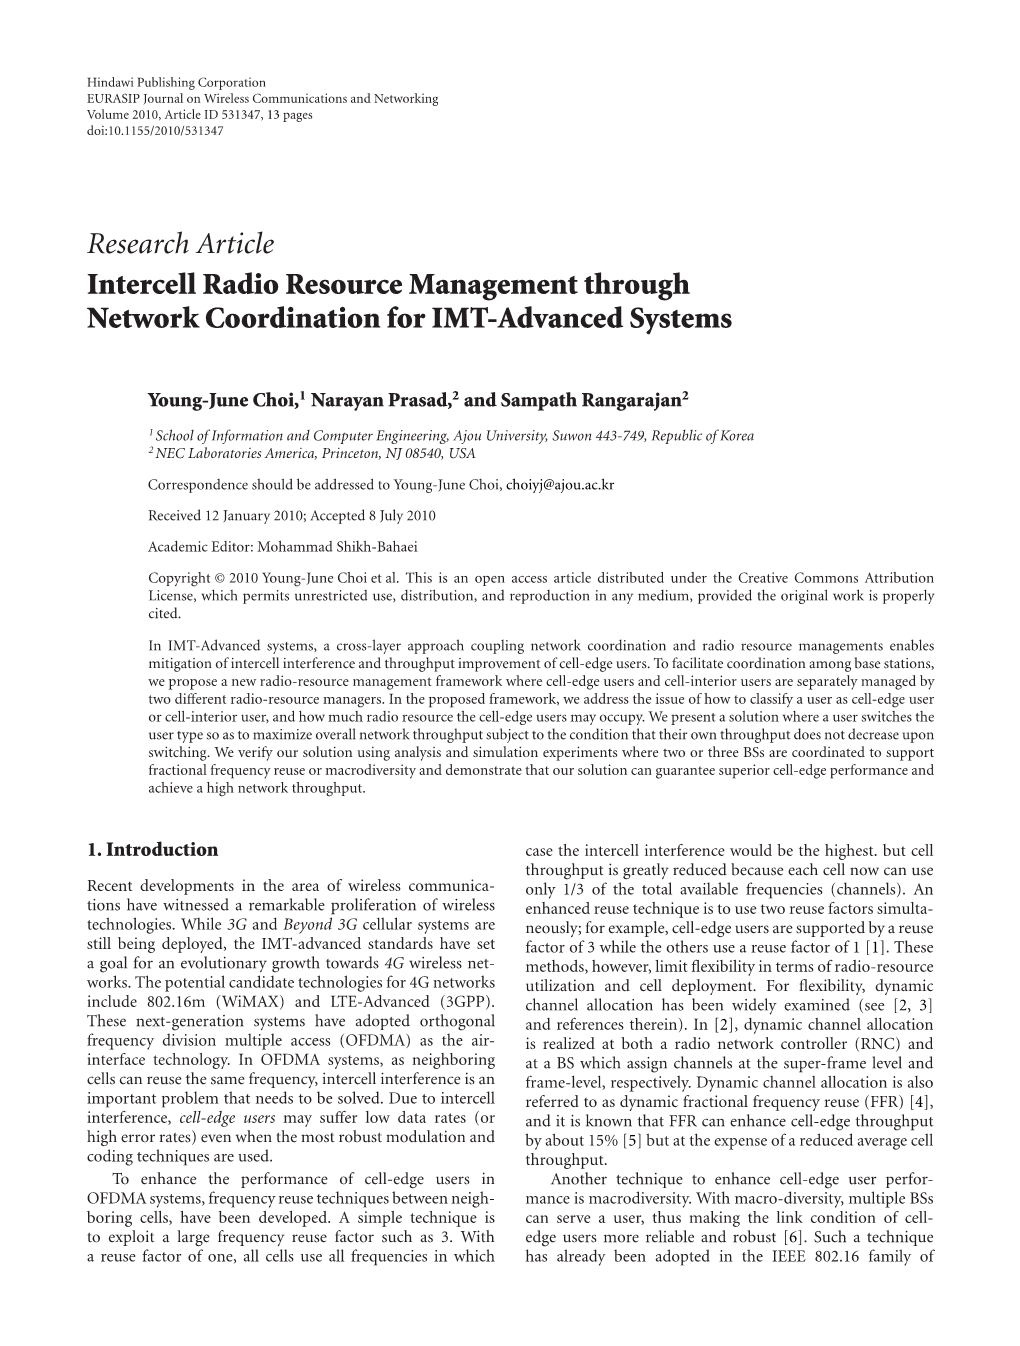 Research Article Intercell Radio Resource Management Through Network Coordination for IMT-Advanced Systems